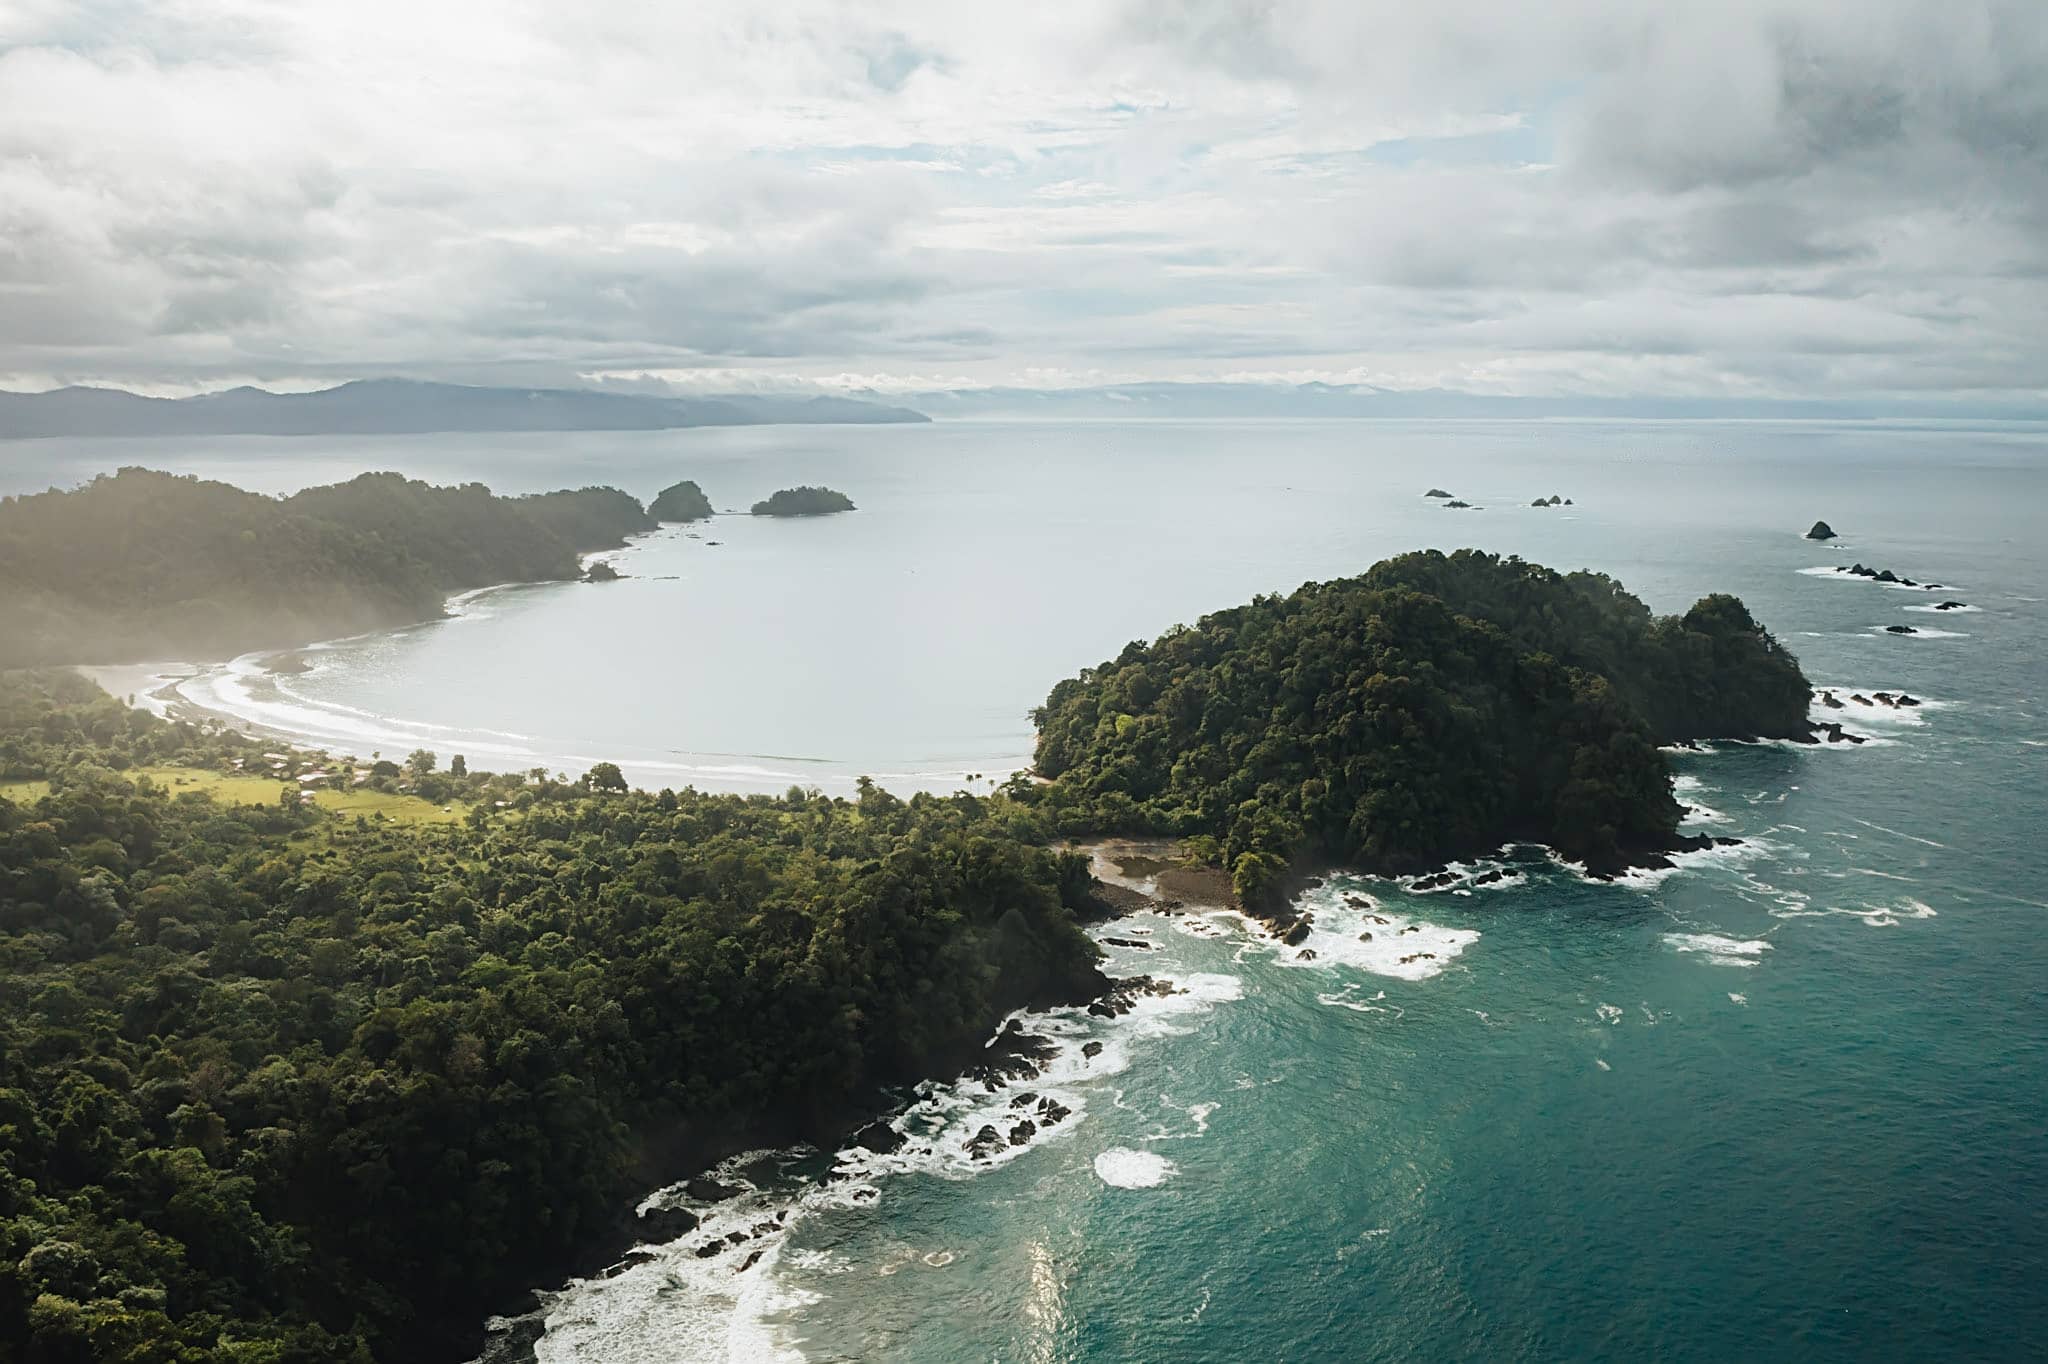 pacific coast of colombia is the wildest and most inaccessible coast line of the country